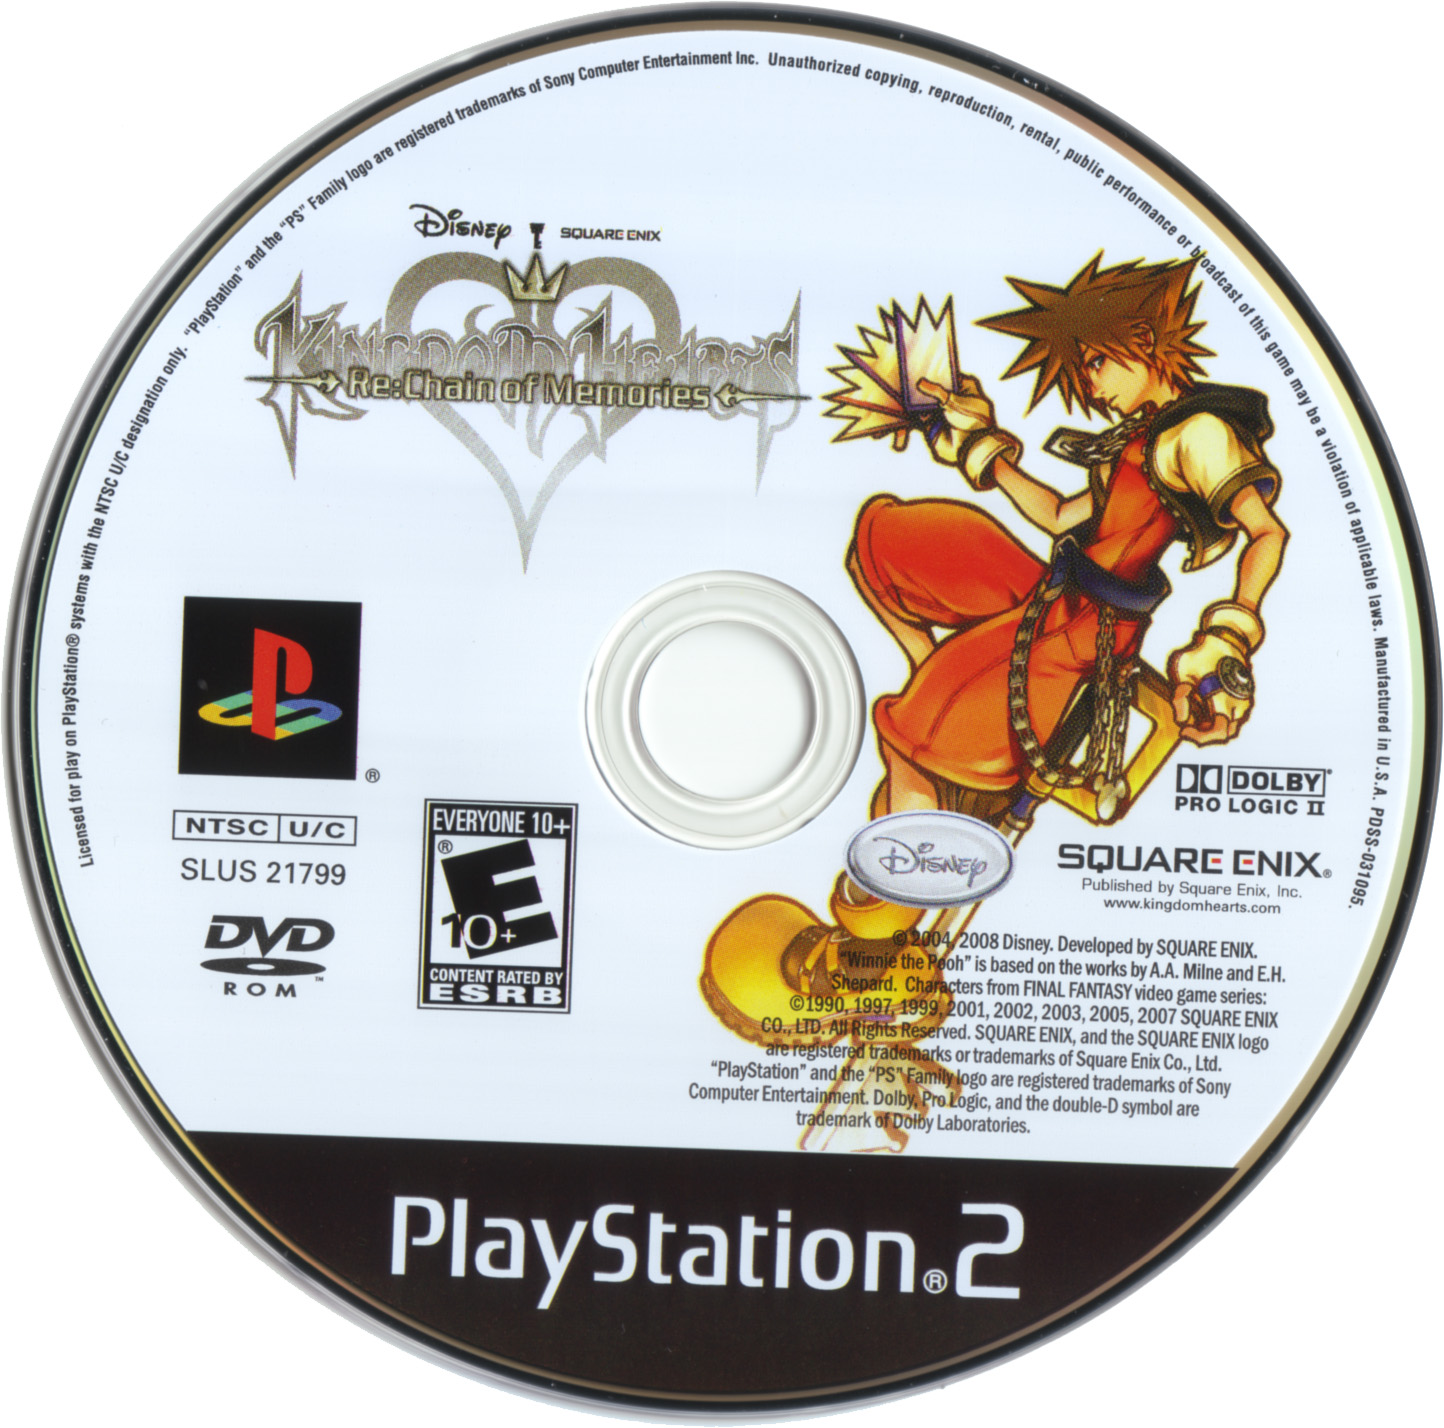 kingdom hearts chain of memories for ps2 walkthrough